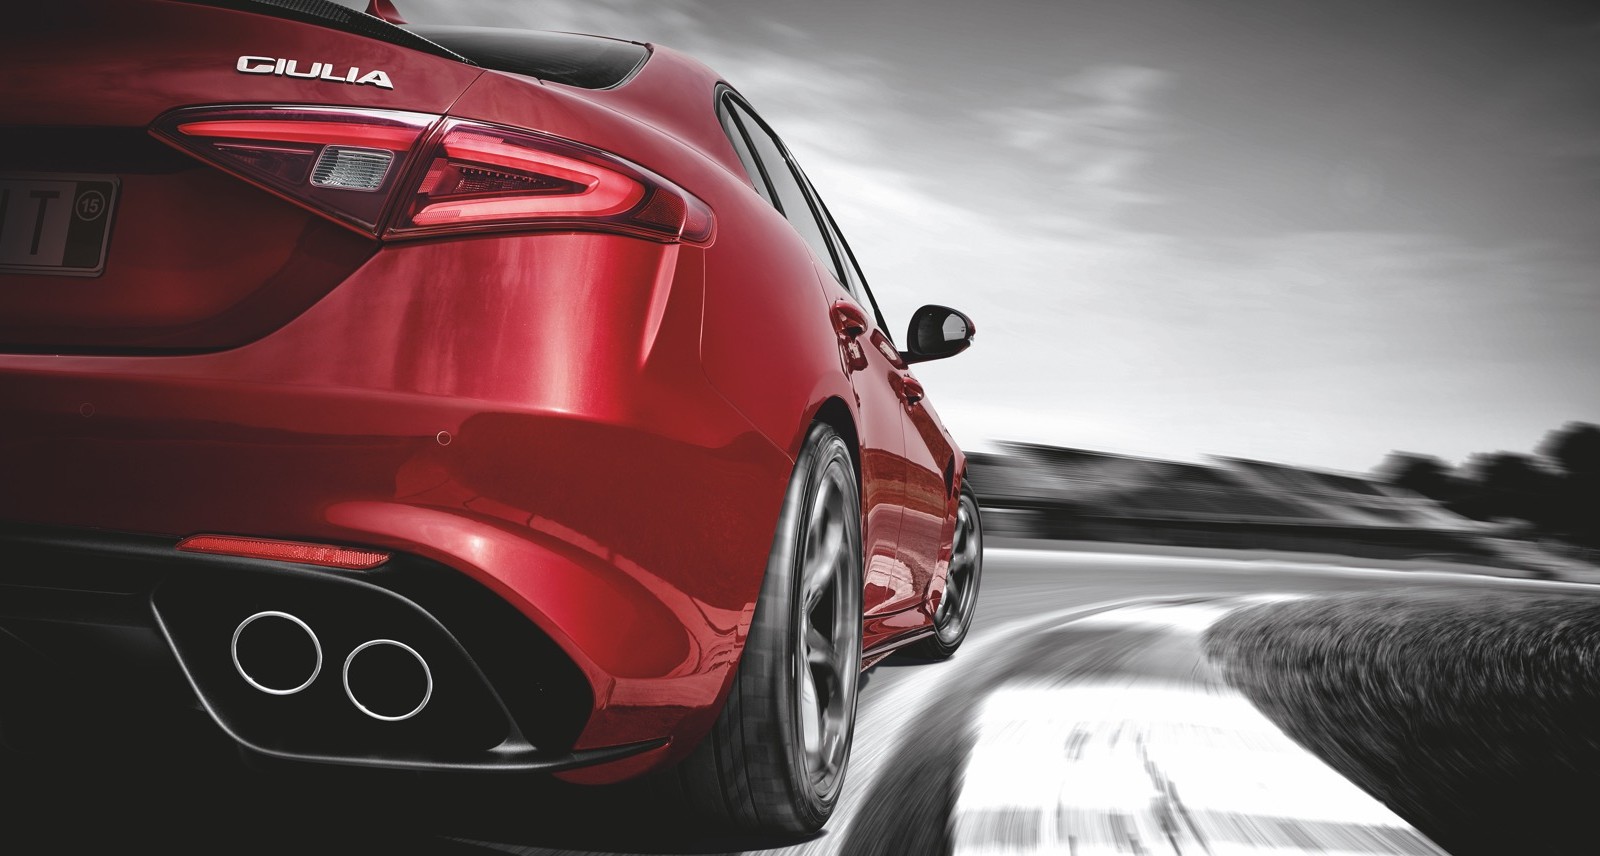 Family Matters: Alfa Romeo's Giulia Is Here to Save You From Boredom, Again